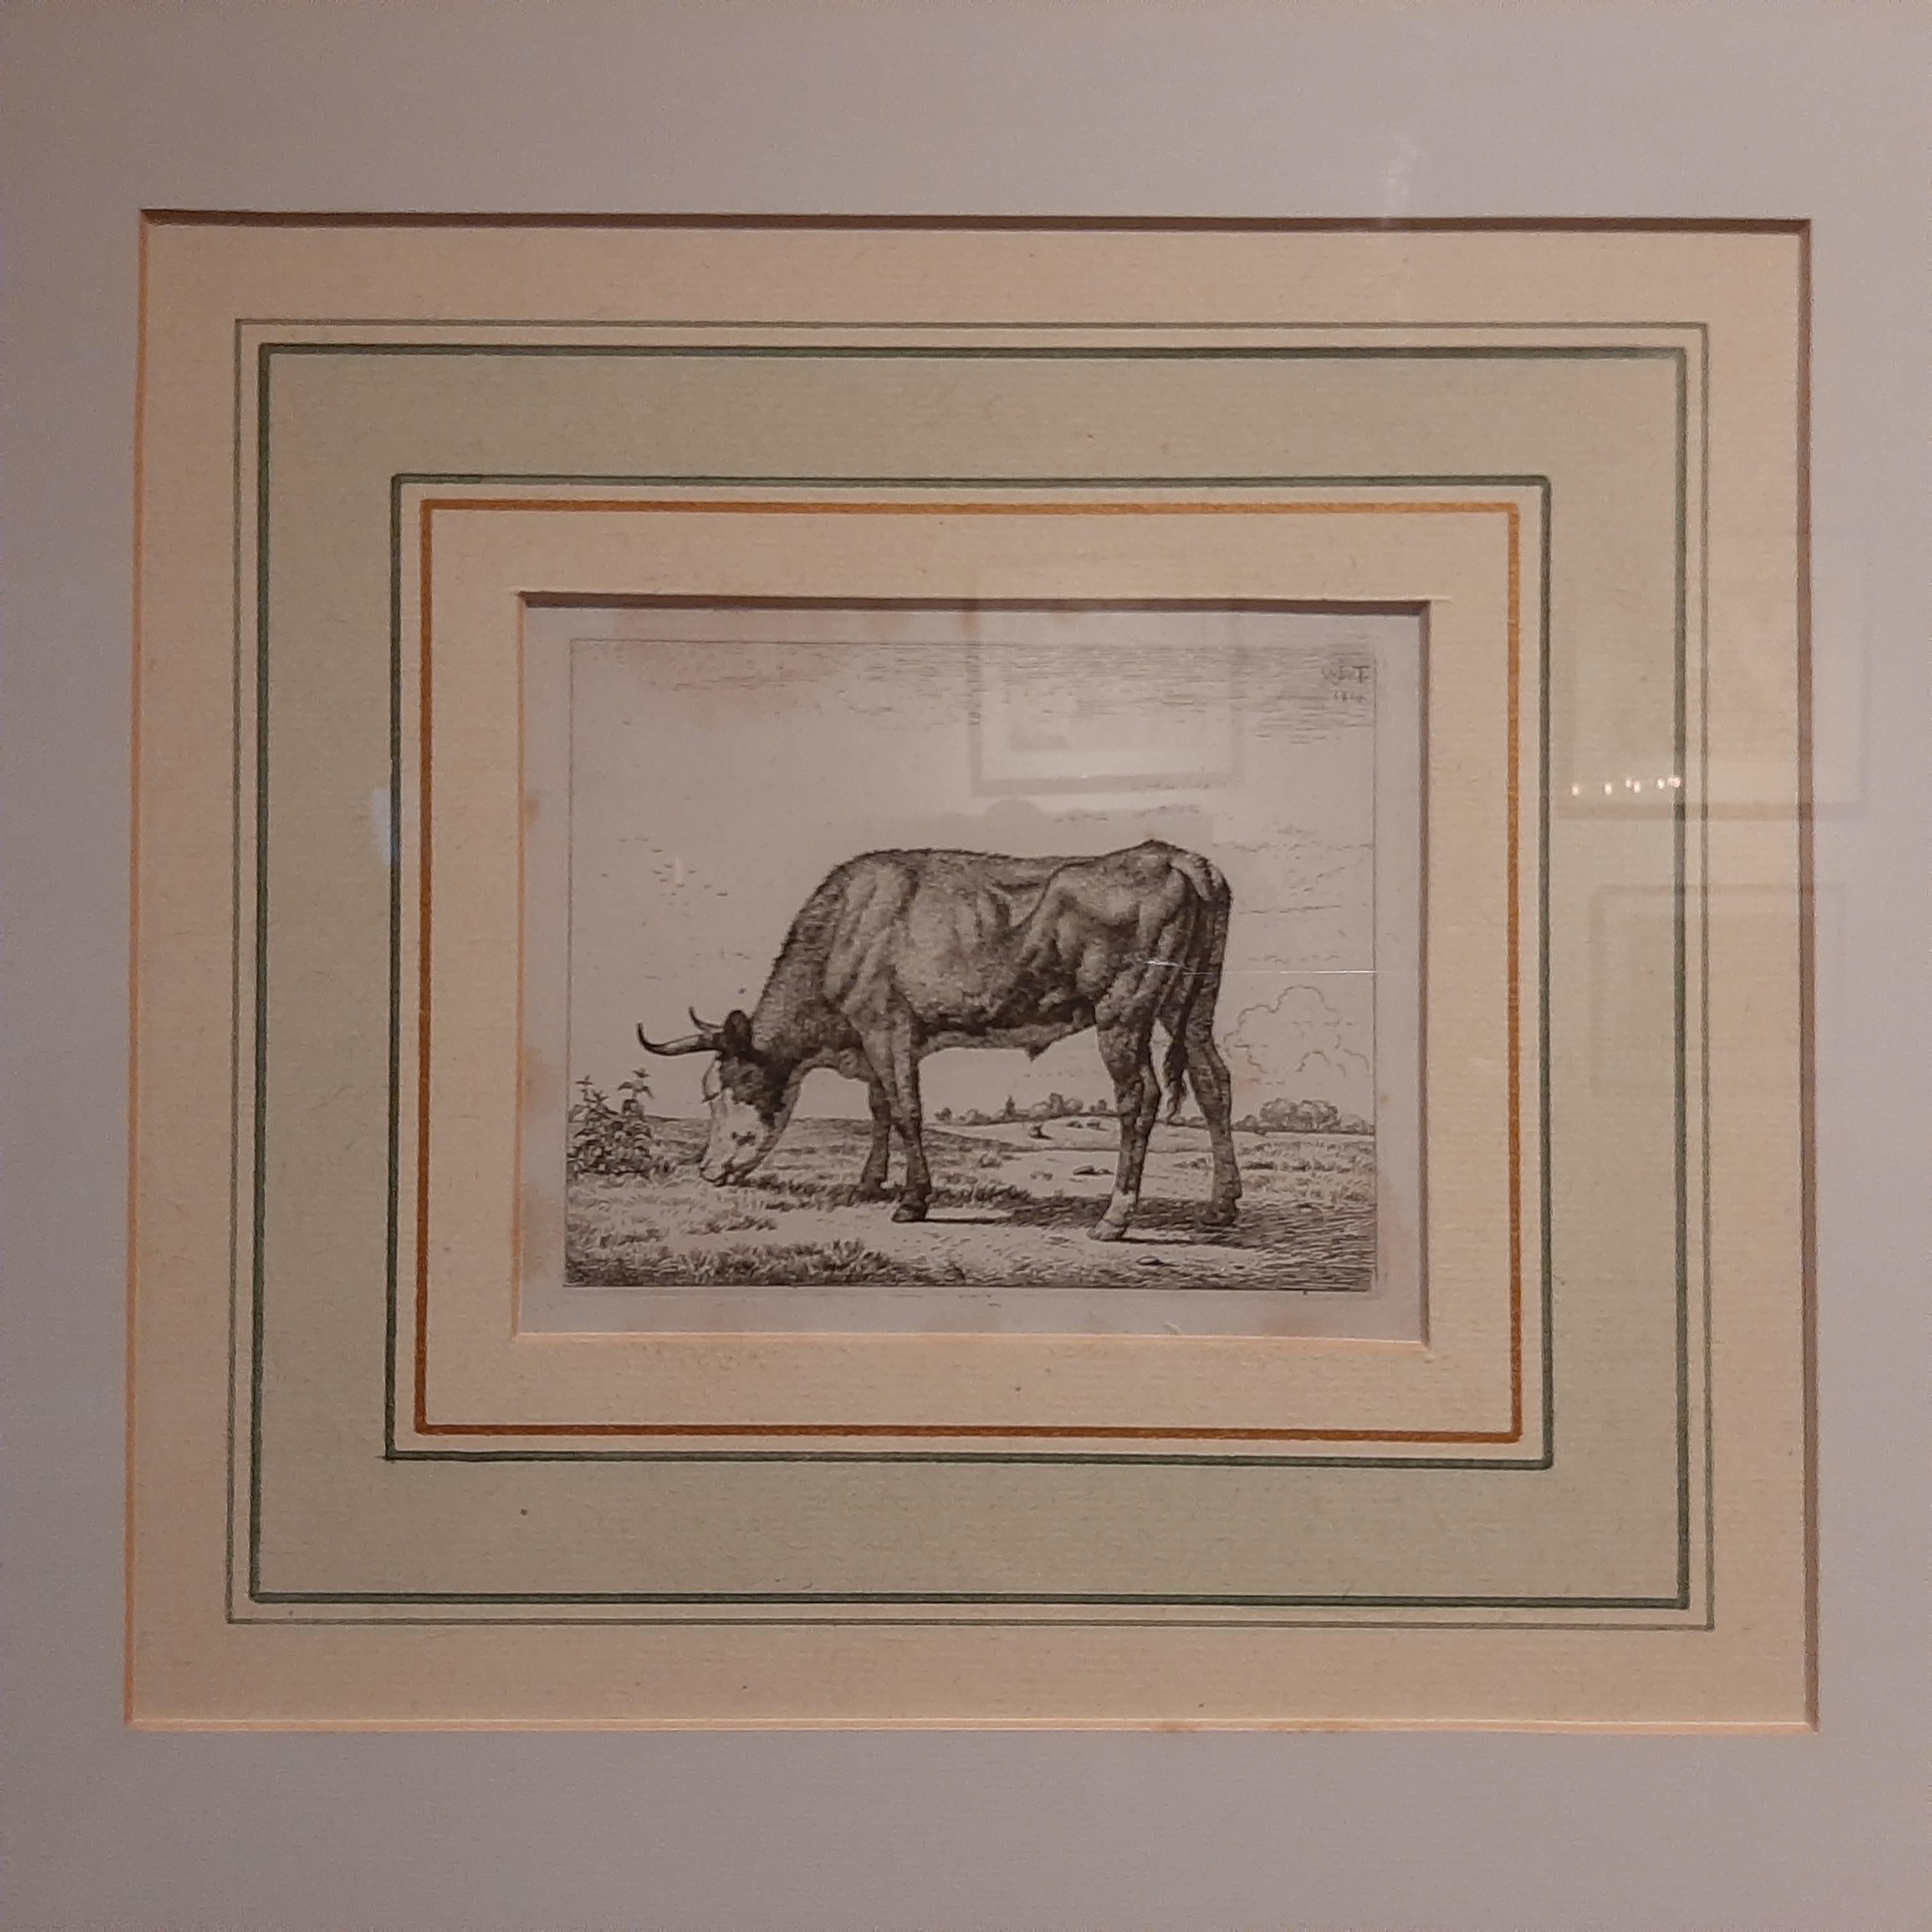 Antique etching of a grazing cow by Wouter Johannes van Troostwijk. Wouter Johannes van Troostwijk was a Dutch painter and etcher. Most of his works are landscapes (featuring cattle) or cityscapes.

Frame included. We carefully pack our framed